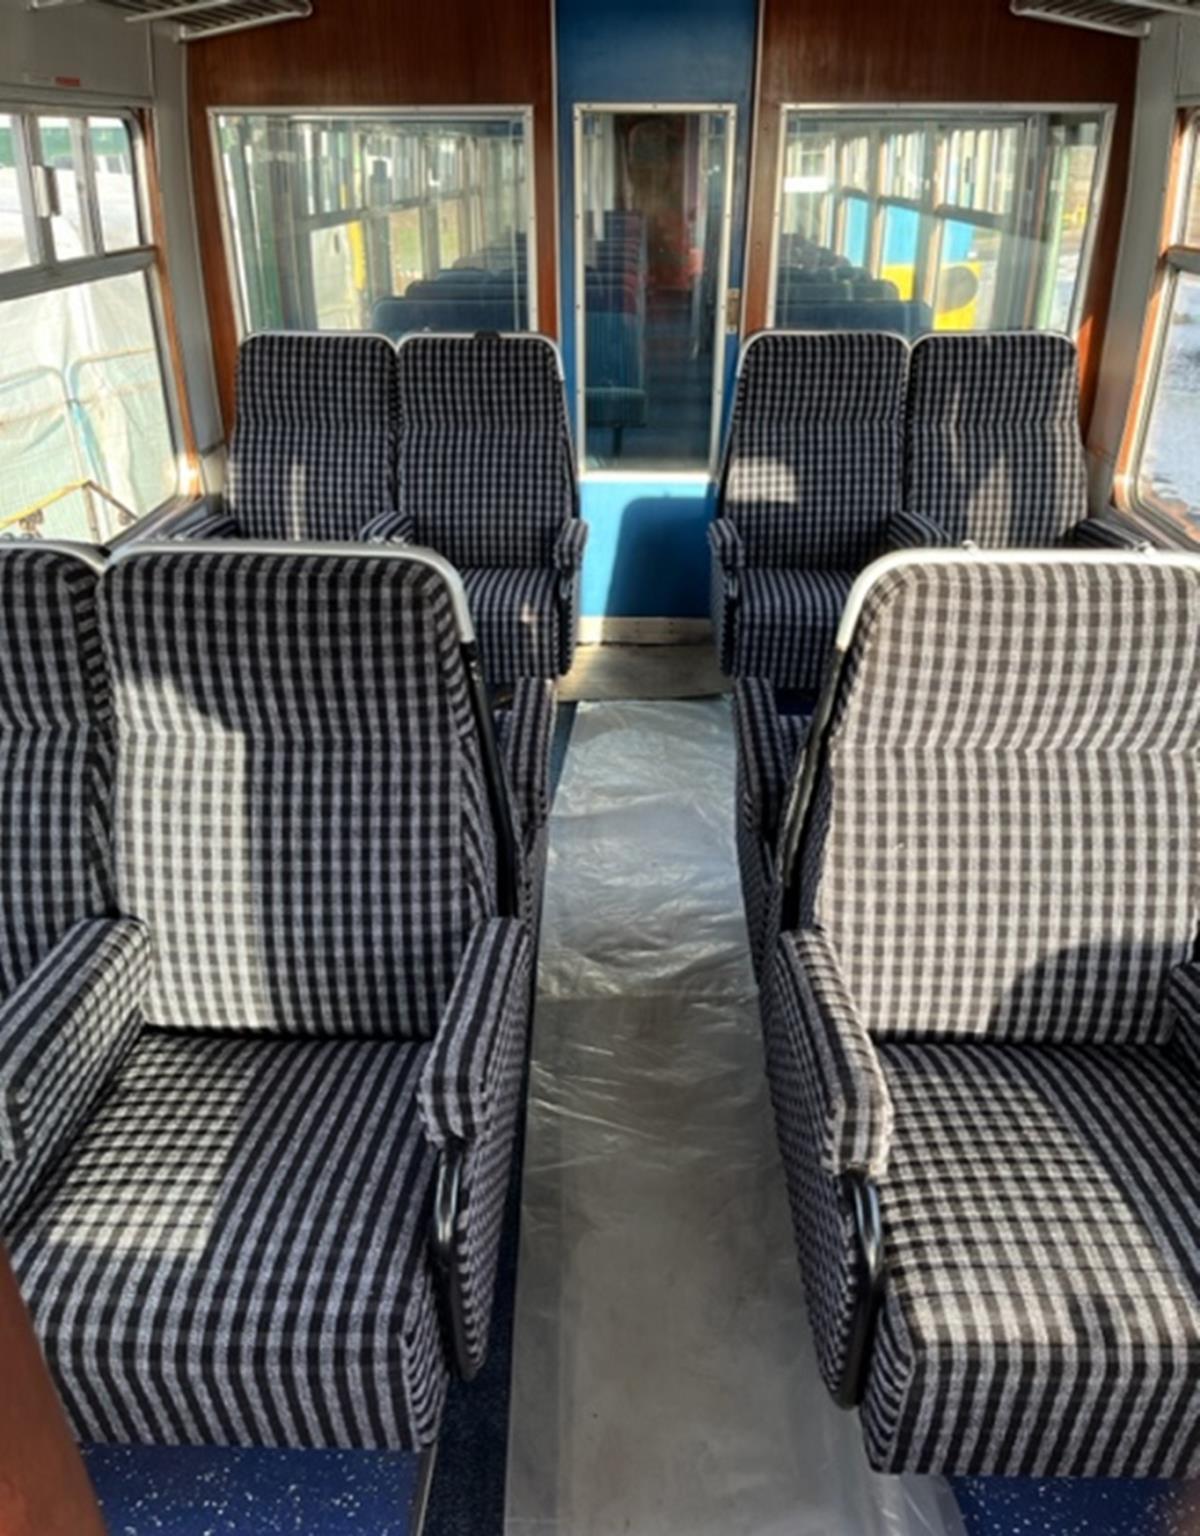 Newly fitted hand rails on first class seating.